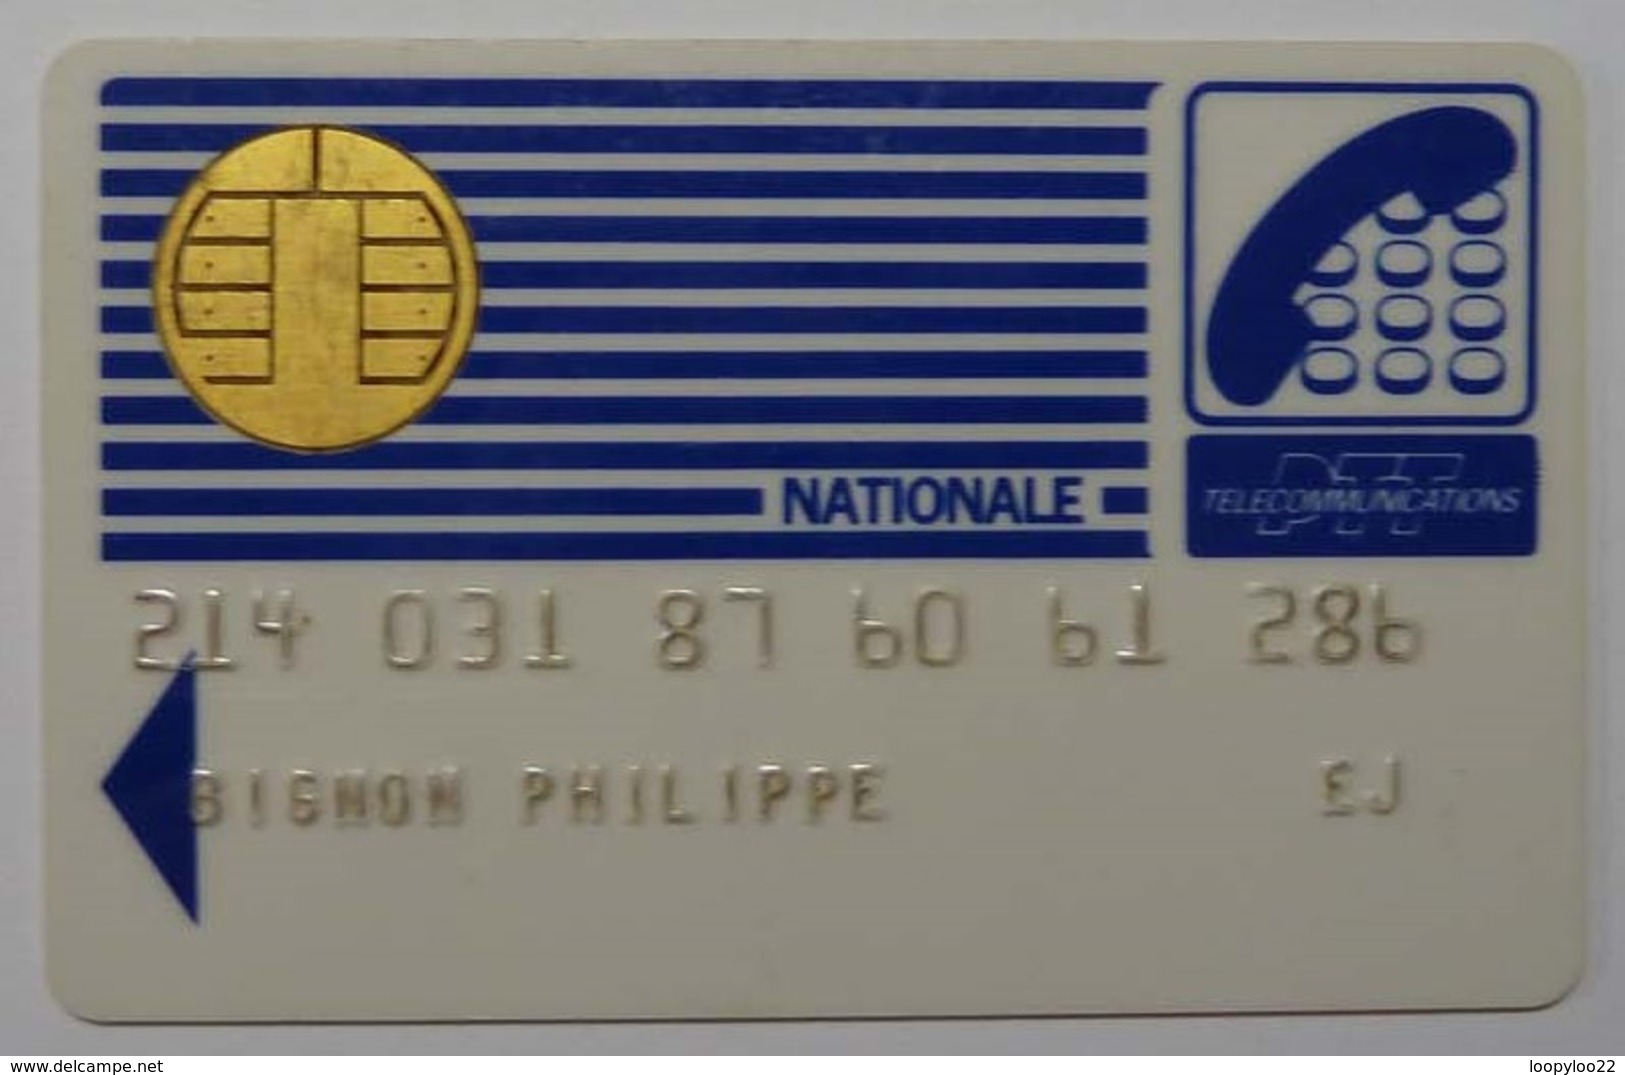 FRANCE - Bull Chip 1 - Rare Early Issue - Carte Telecommunications Nationale Calling Card - PTT - Used - Privées